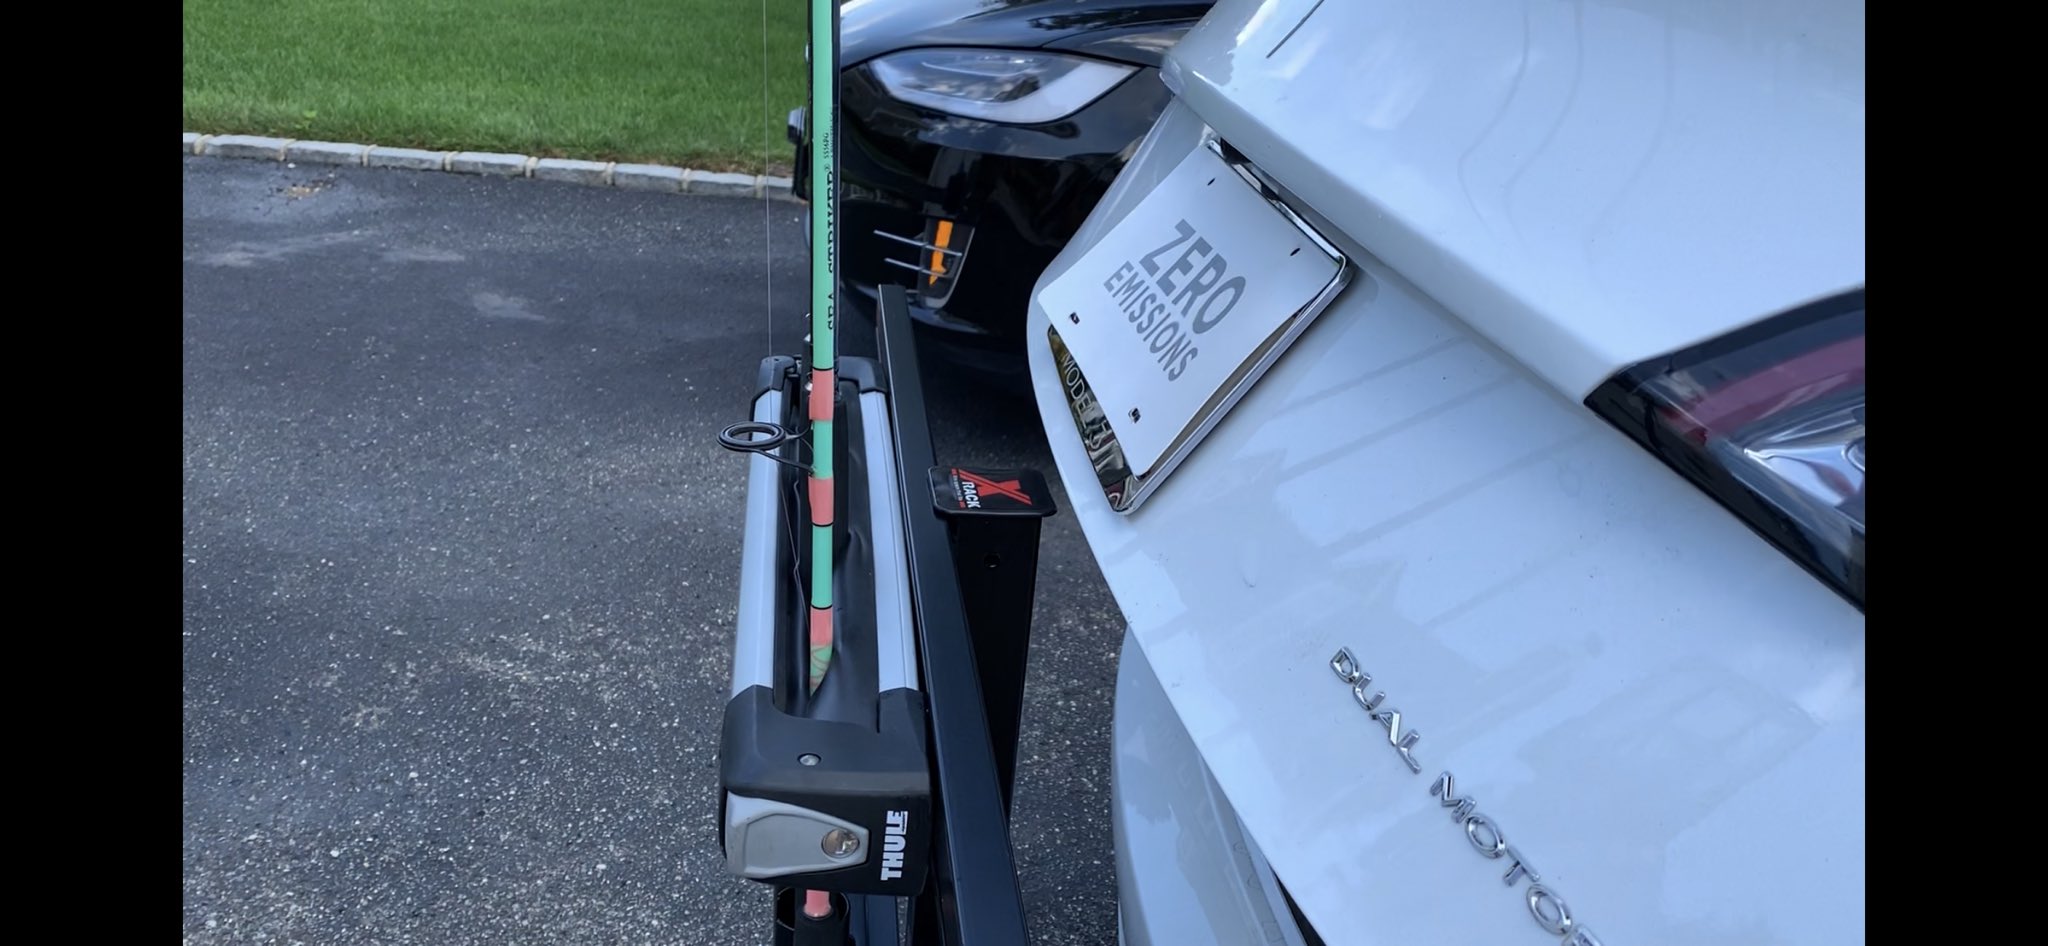 X-Rack on X: Here is an easy way to carry fishing rods 🎣 on your